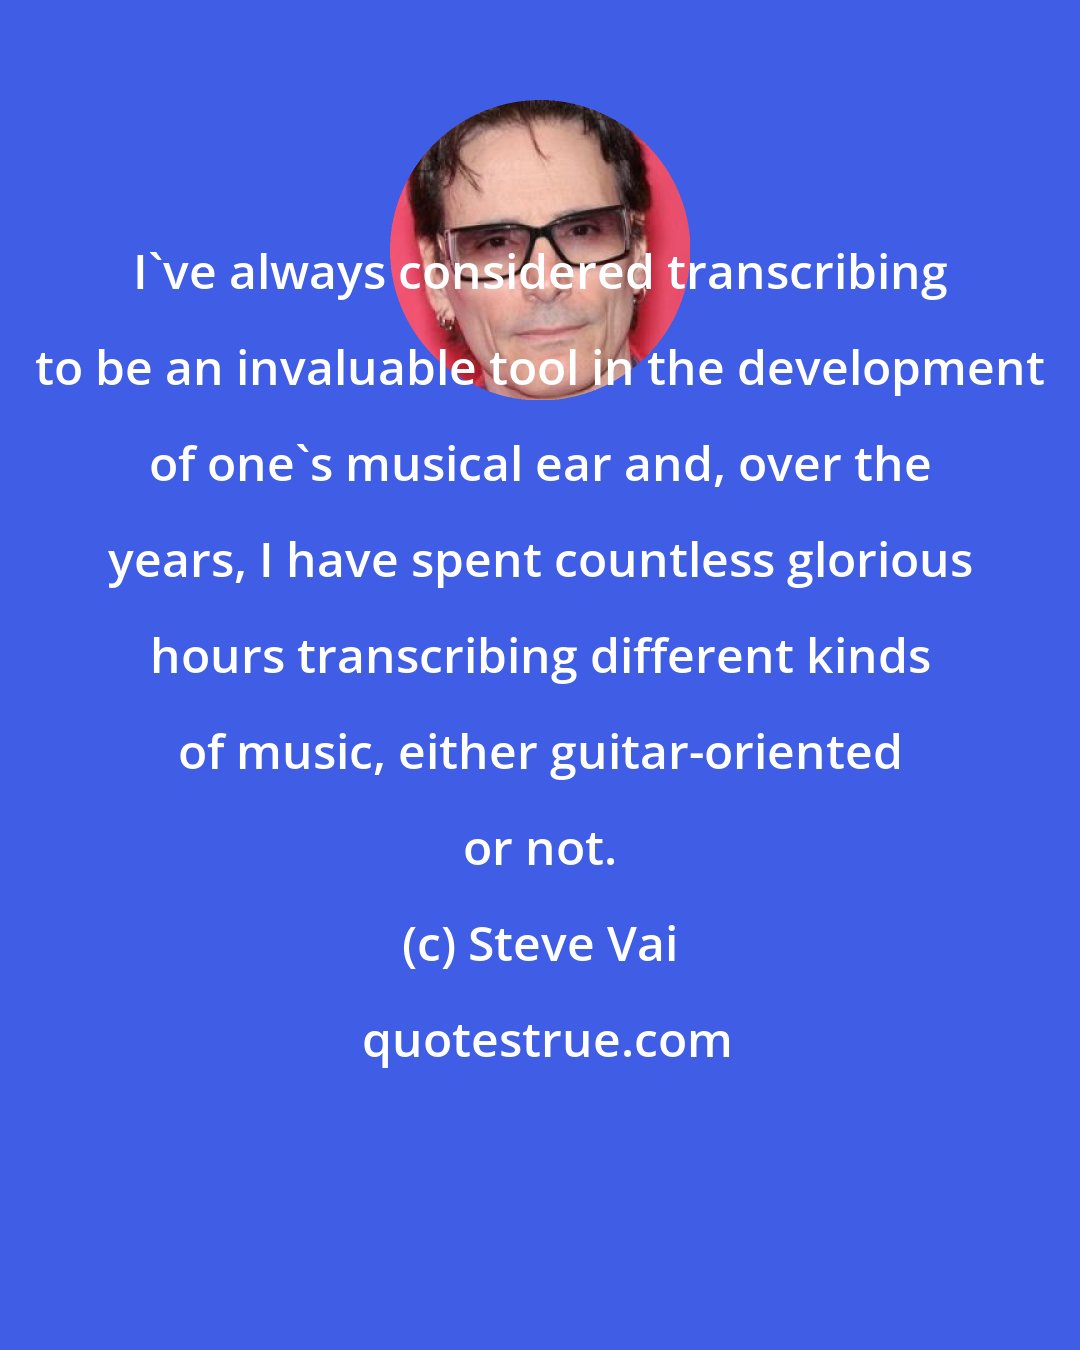 Steve Vai: I've always considered transcribing to be an invaluable tool in the development of one's musical ear and, over the years, I have spent countless glorious hours transcribing different kinds of music, either guitar-oriented or not.